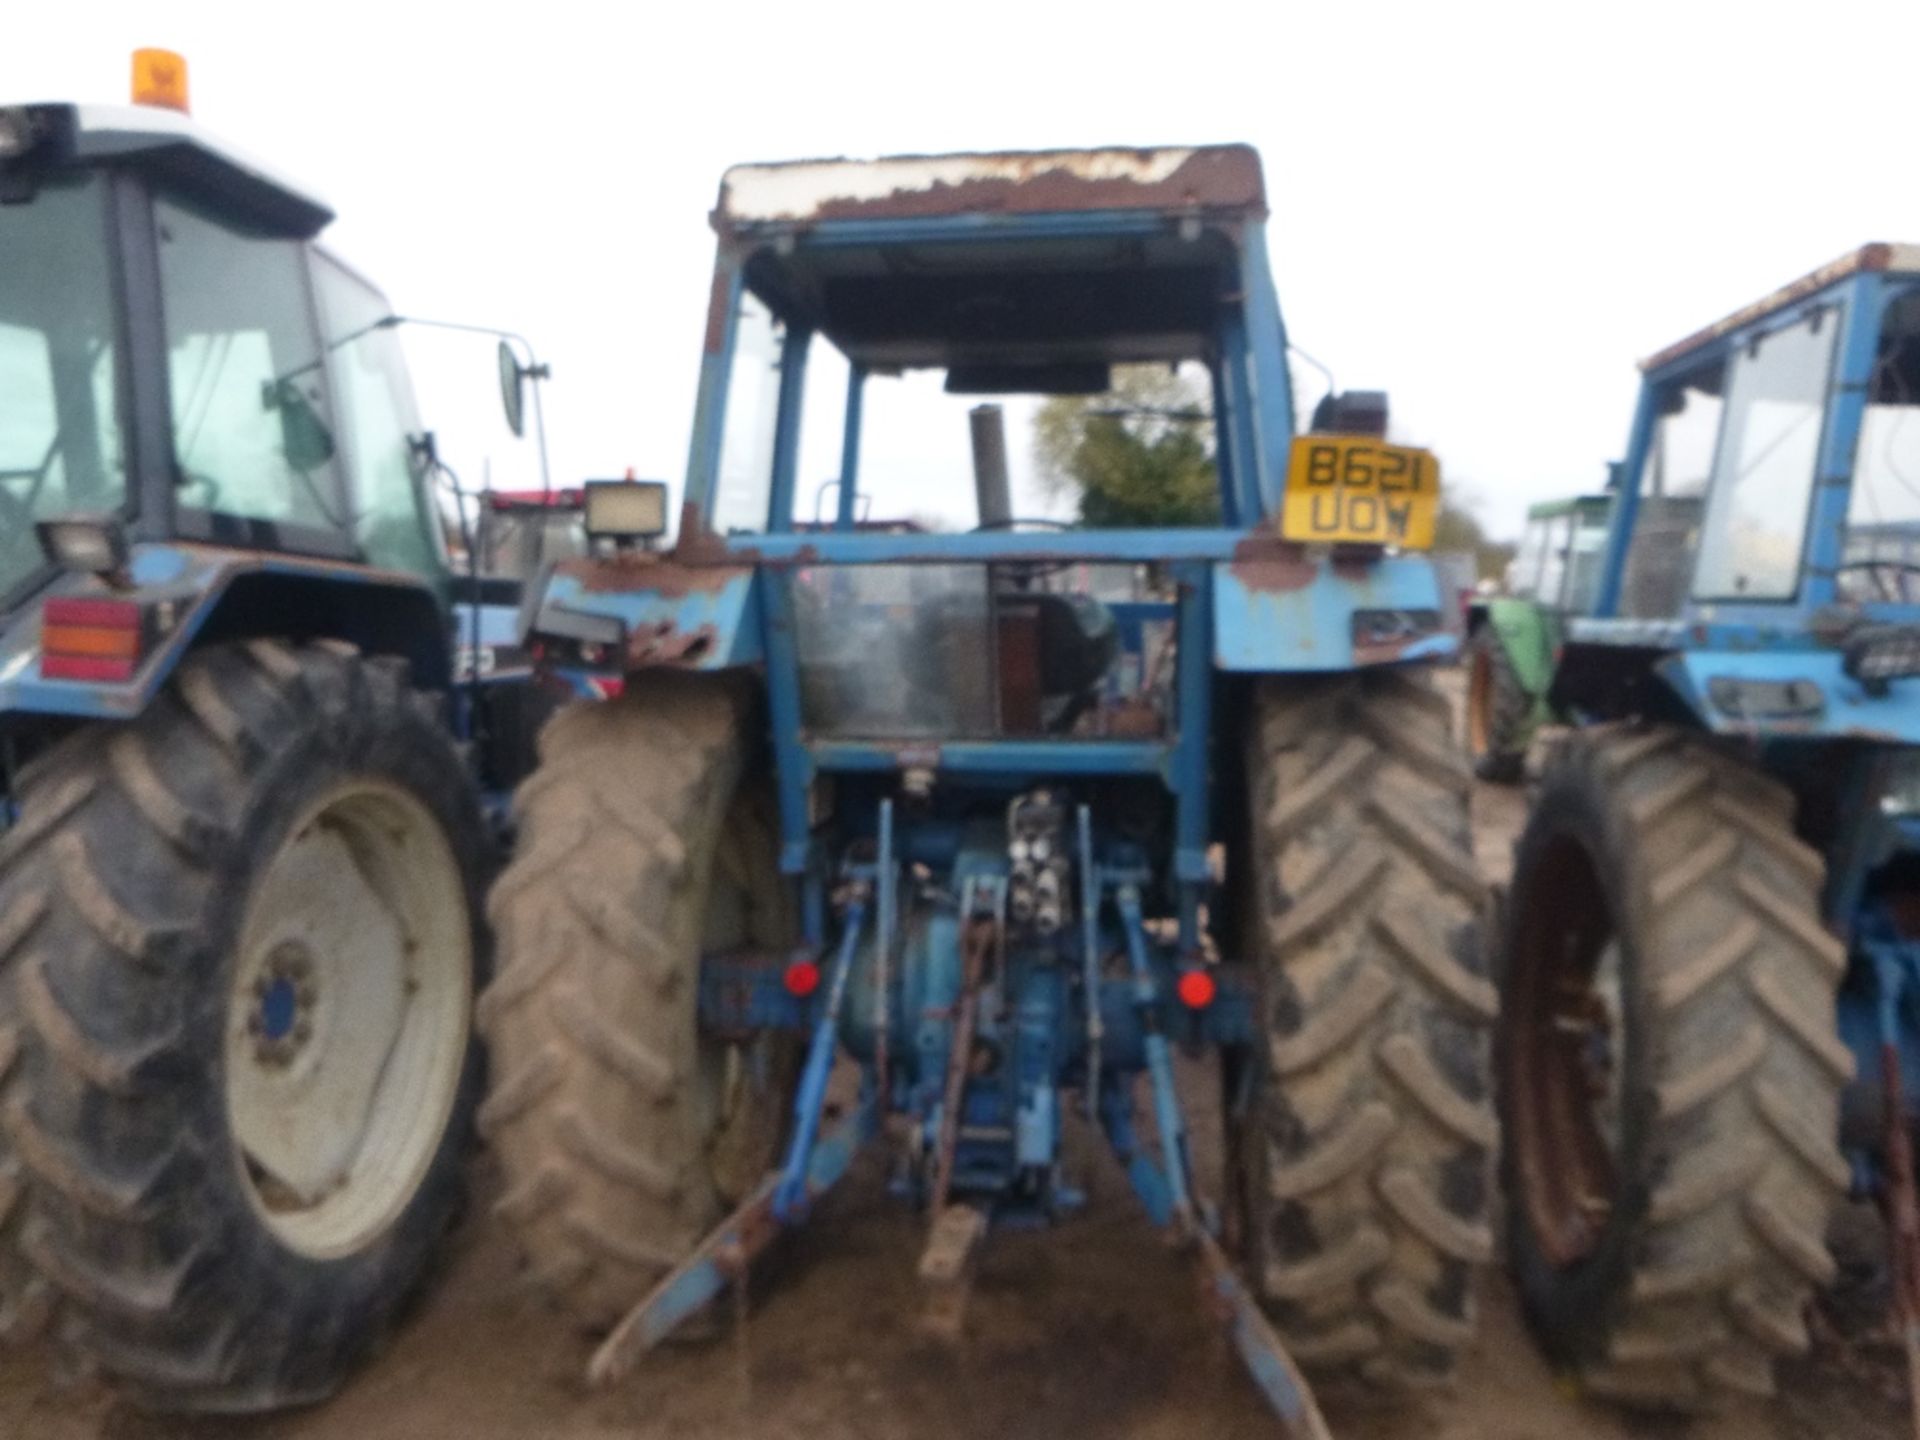 Ford 5610 2wd Tractor with Floor Change Gearbox. Reg. No. B621 UOW Ser. No. BA22021 - Image 6 of 13